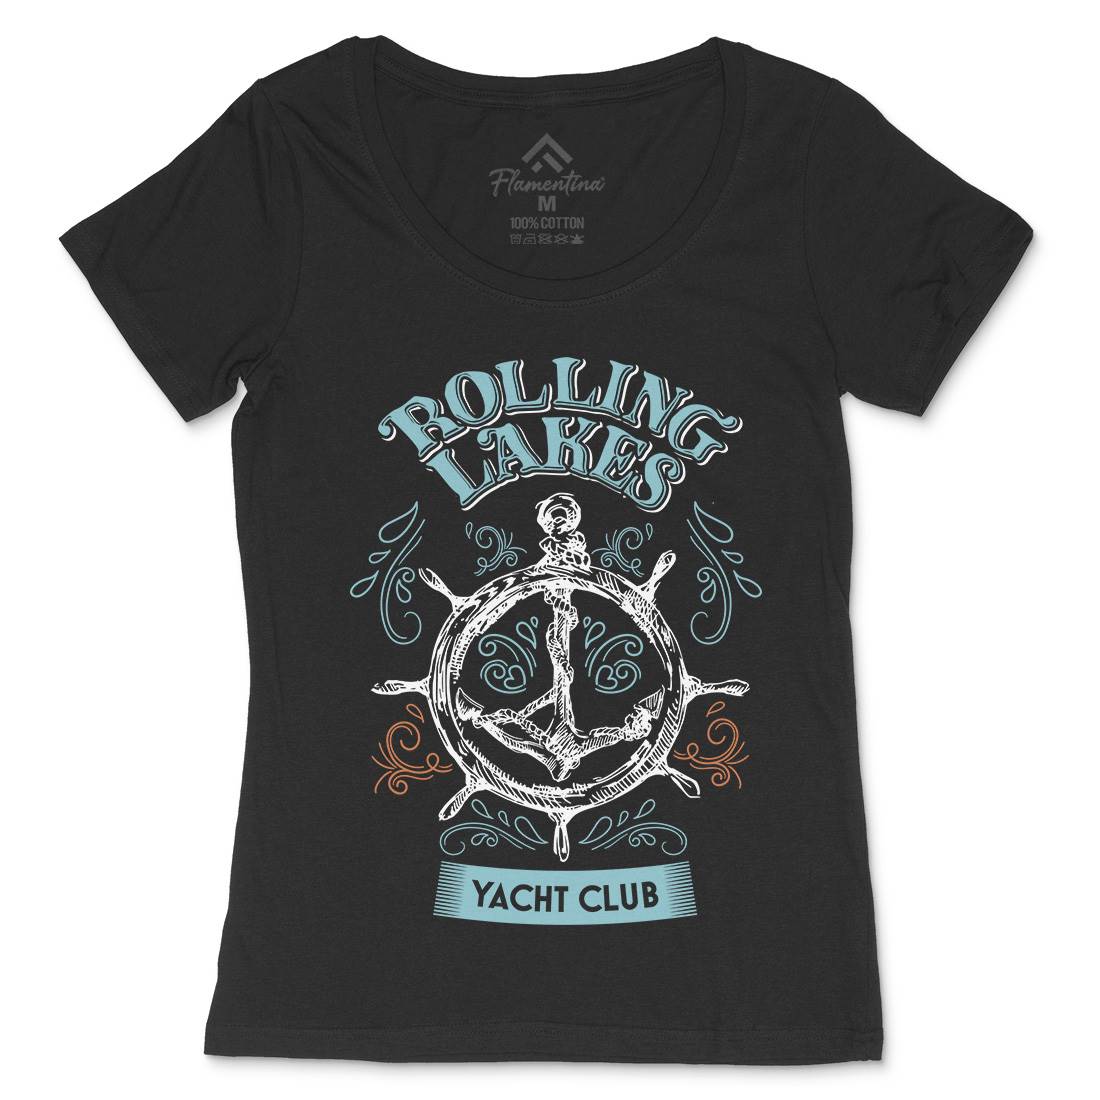 Rolling Lakes Yacht Club Womens Scoop Neck T-Shirt Horror D252